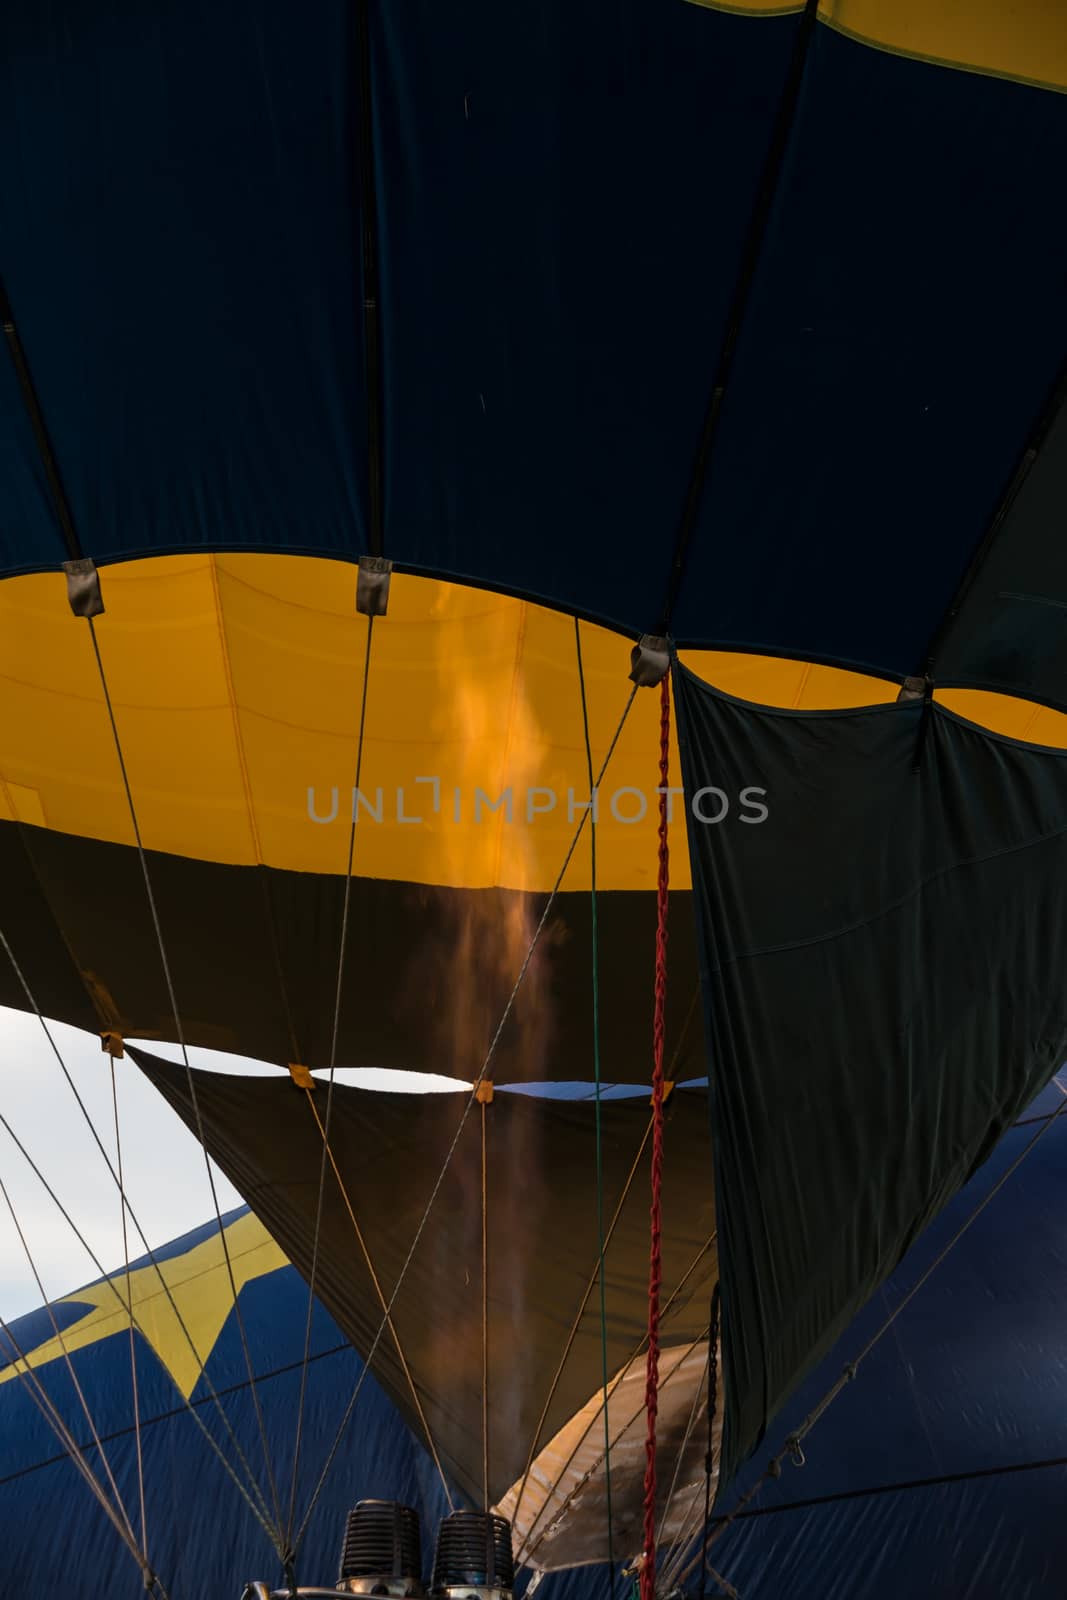 2013 Temecula Balloon and Wine Festival by cvalle